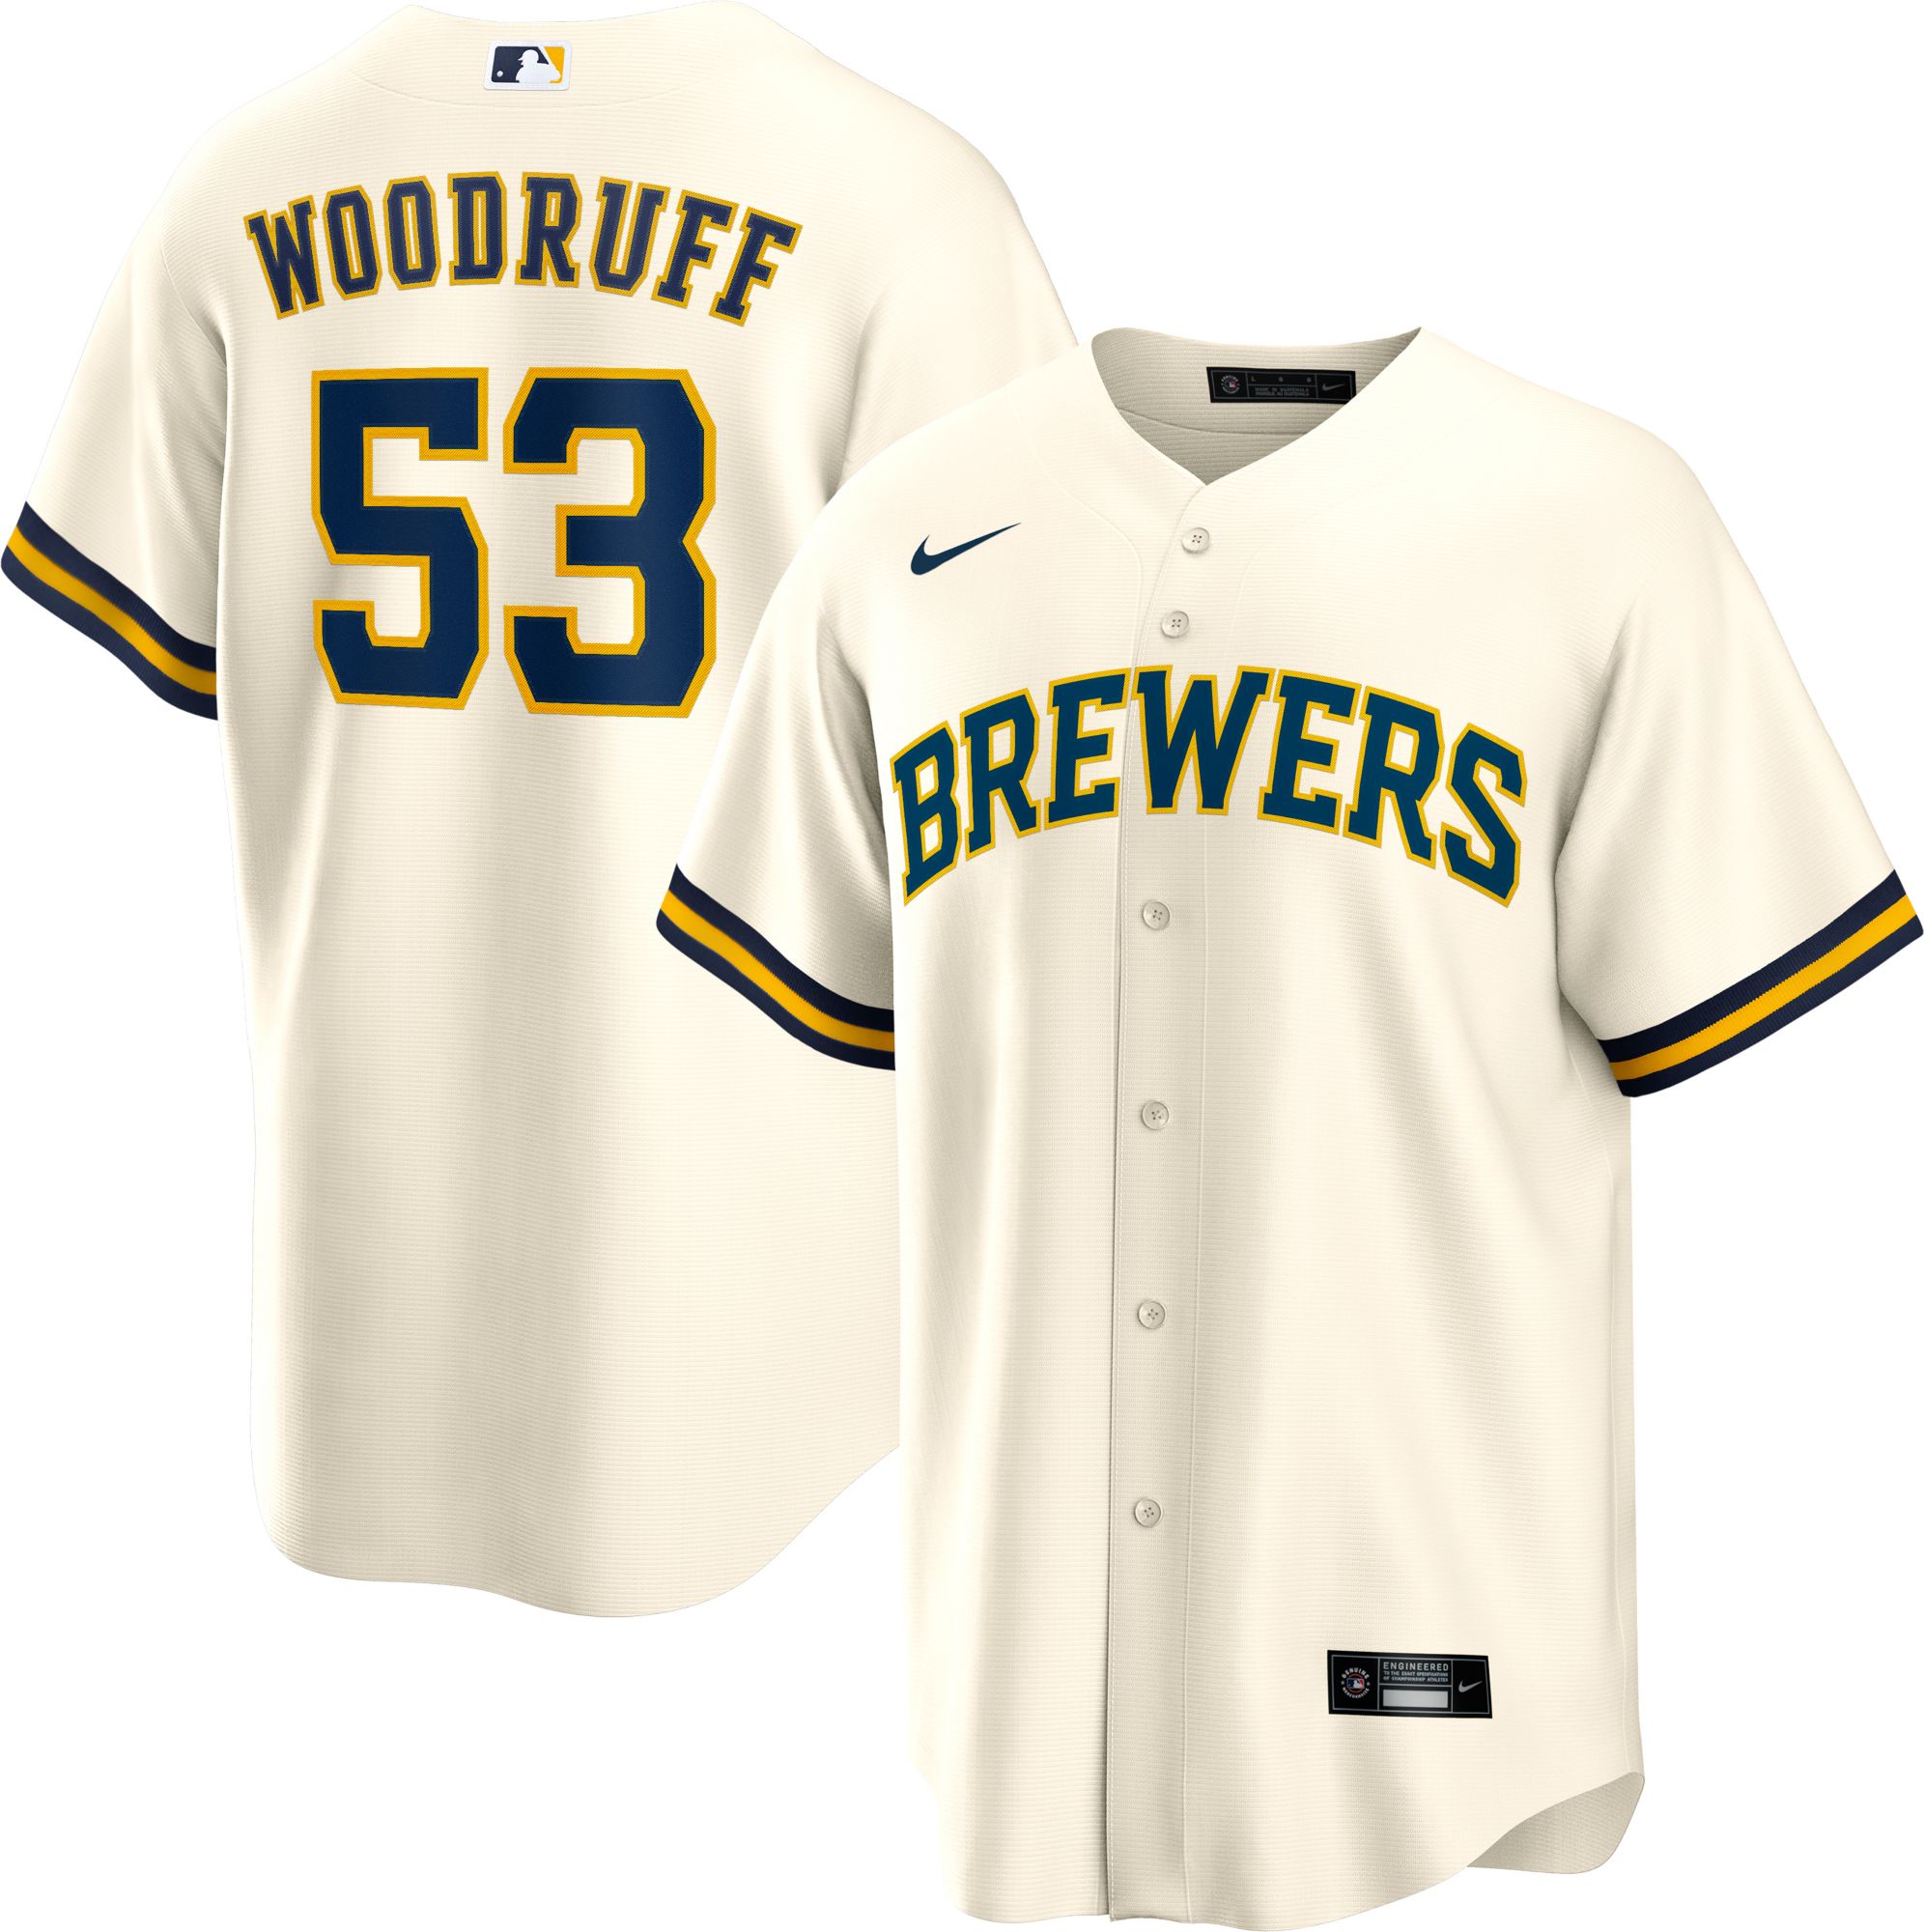 Brandon Woodruff 2020 Team-Issued Home Cream Jersey (Authenticated 09/16/20  Gm1 - Complete Game 7.0 IP, 7 H, 4 R, 3 ER, 0 BB, 5 SO)